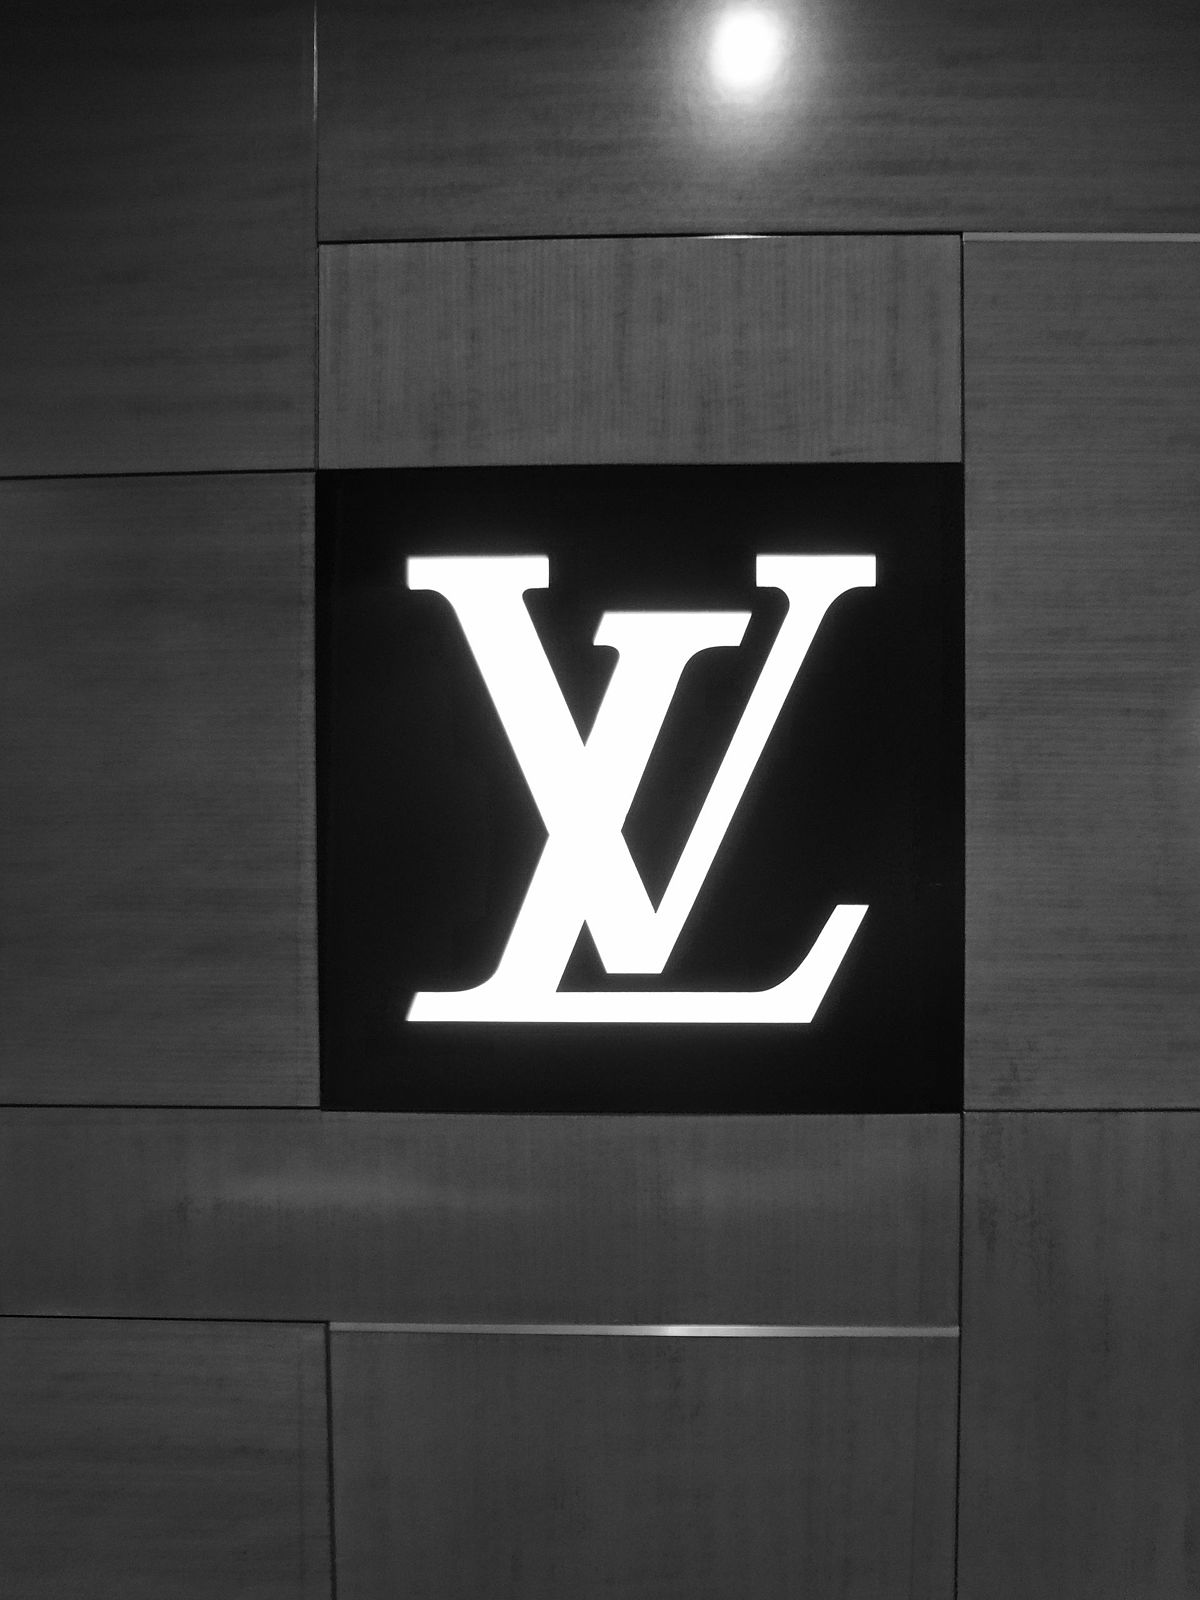 File:Louis or shortened to LV, is a French fashion house founded in 1854 by Louis Vuitton Photography david adam madrid 2016.jpg - Wikimedia Commons